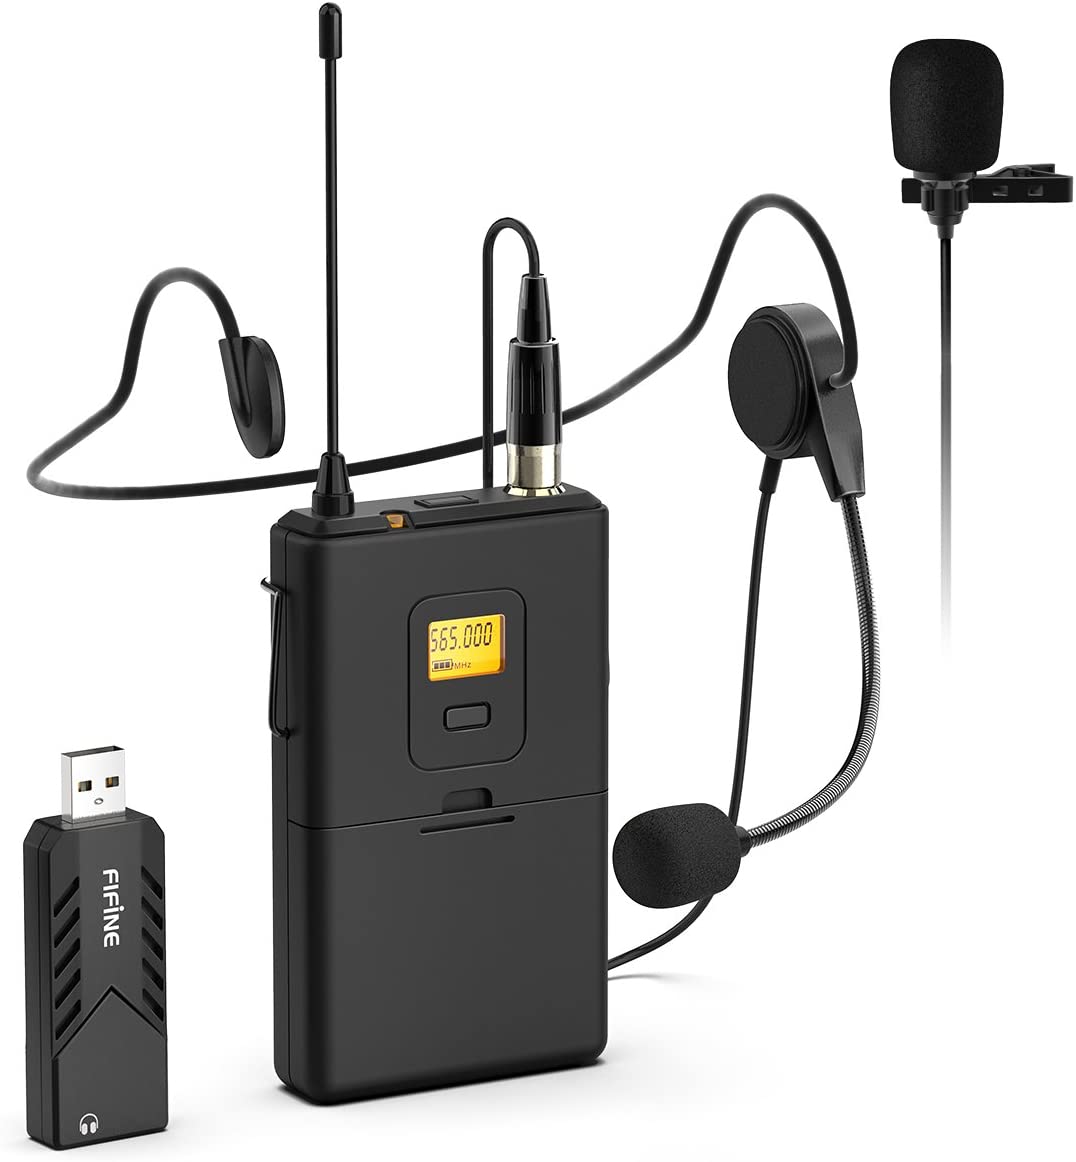 Fifine K031B Wireless USB Microphones for Computers, PC, Mac, USB Receiver, Transmitter, Headset and Clip Lavalier Lapel Mic